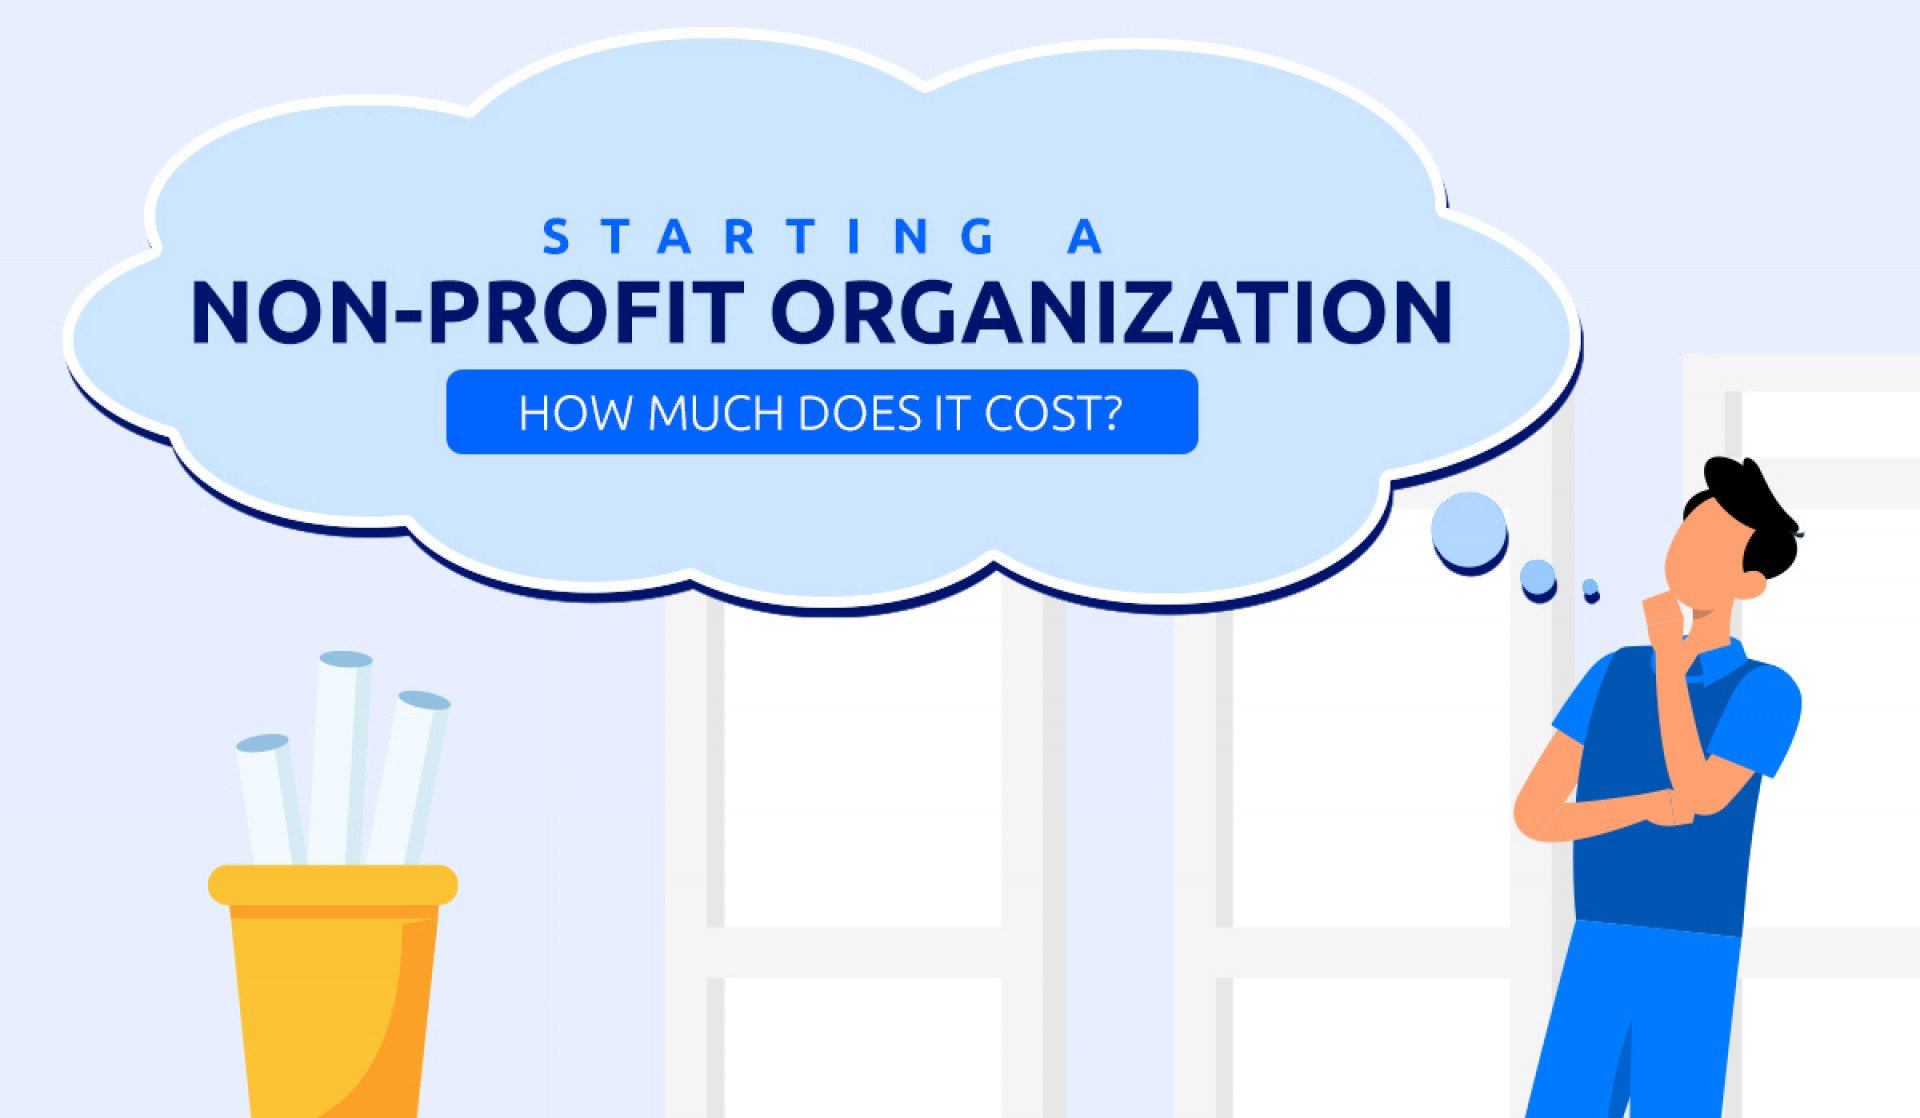 How Much Does It Cost to Start a Nonprofit Organization?